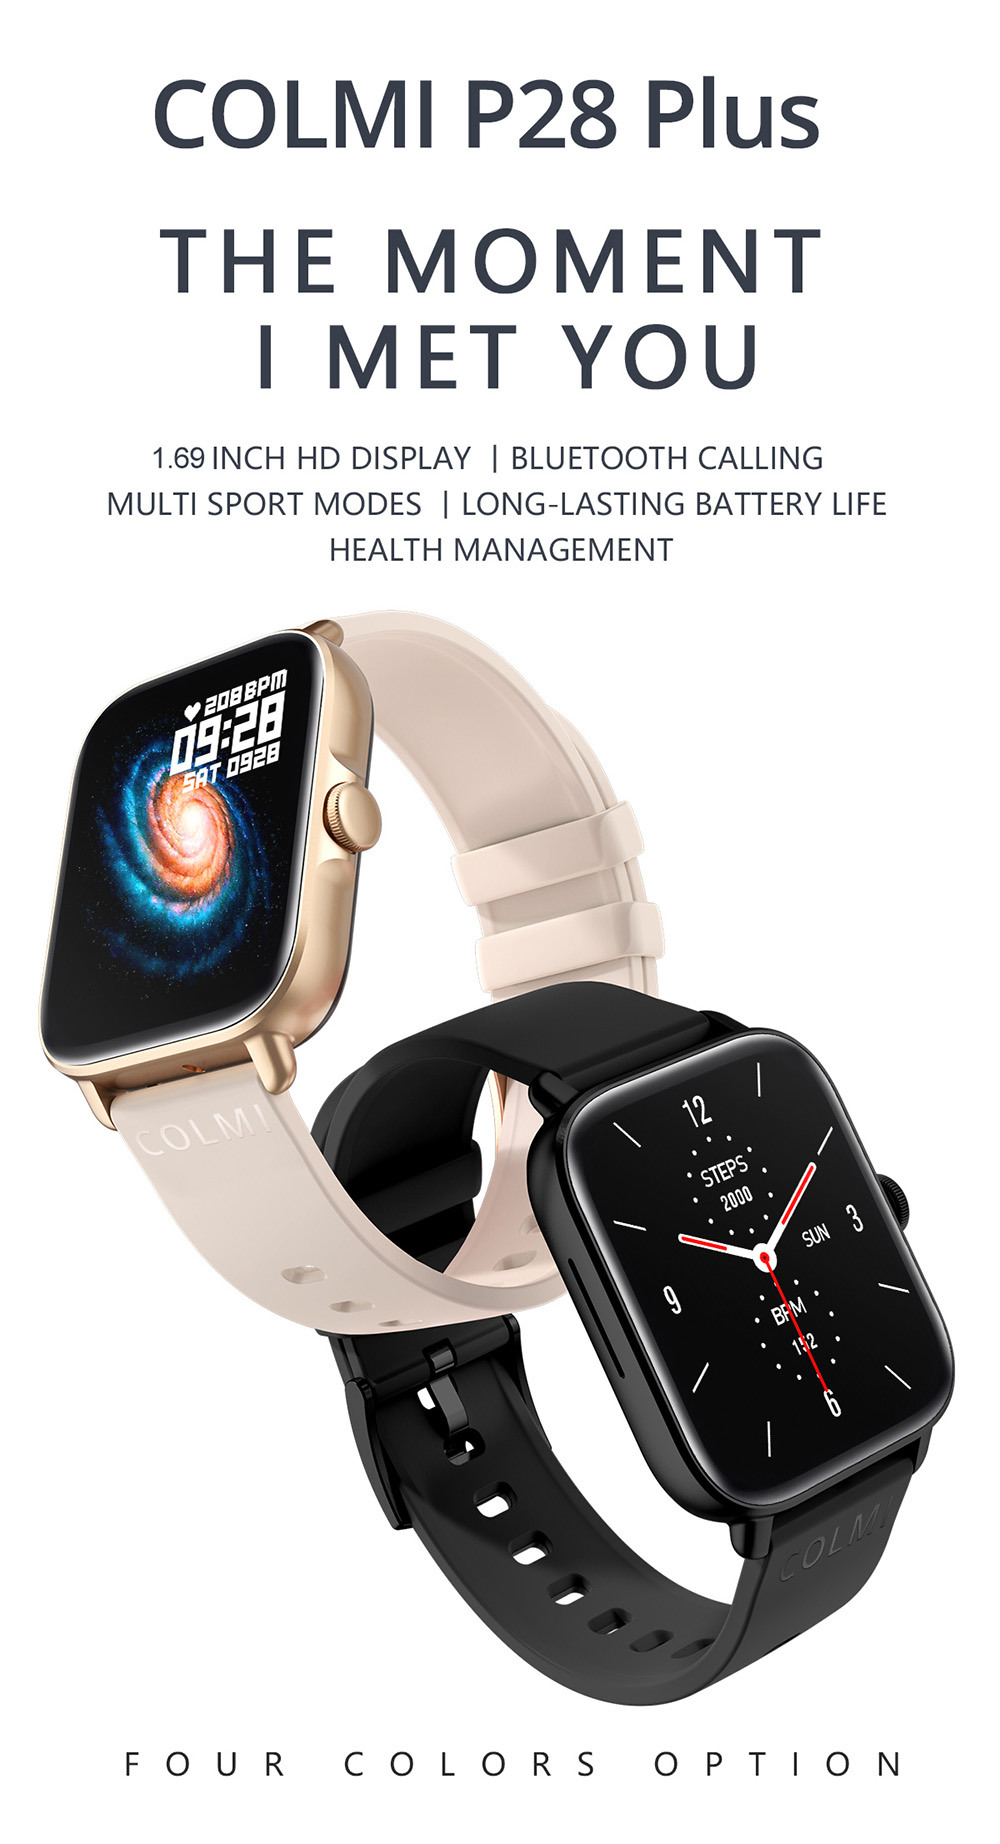 Android iOS Smartwatch | Bluetooth, Call, Waterproof, Sports Watch. Long Battery Life, Social Media Working. P28 Plus Watch 